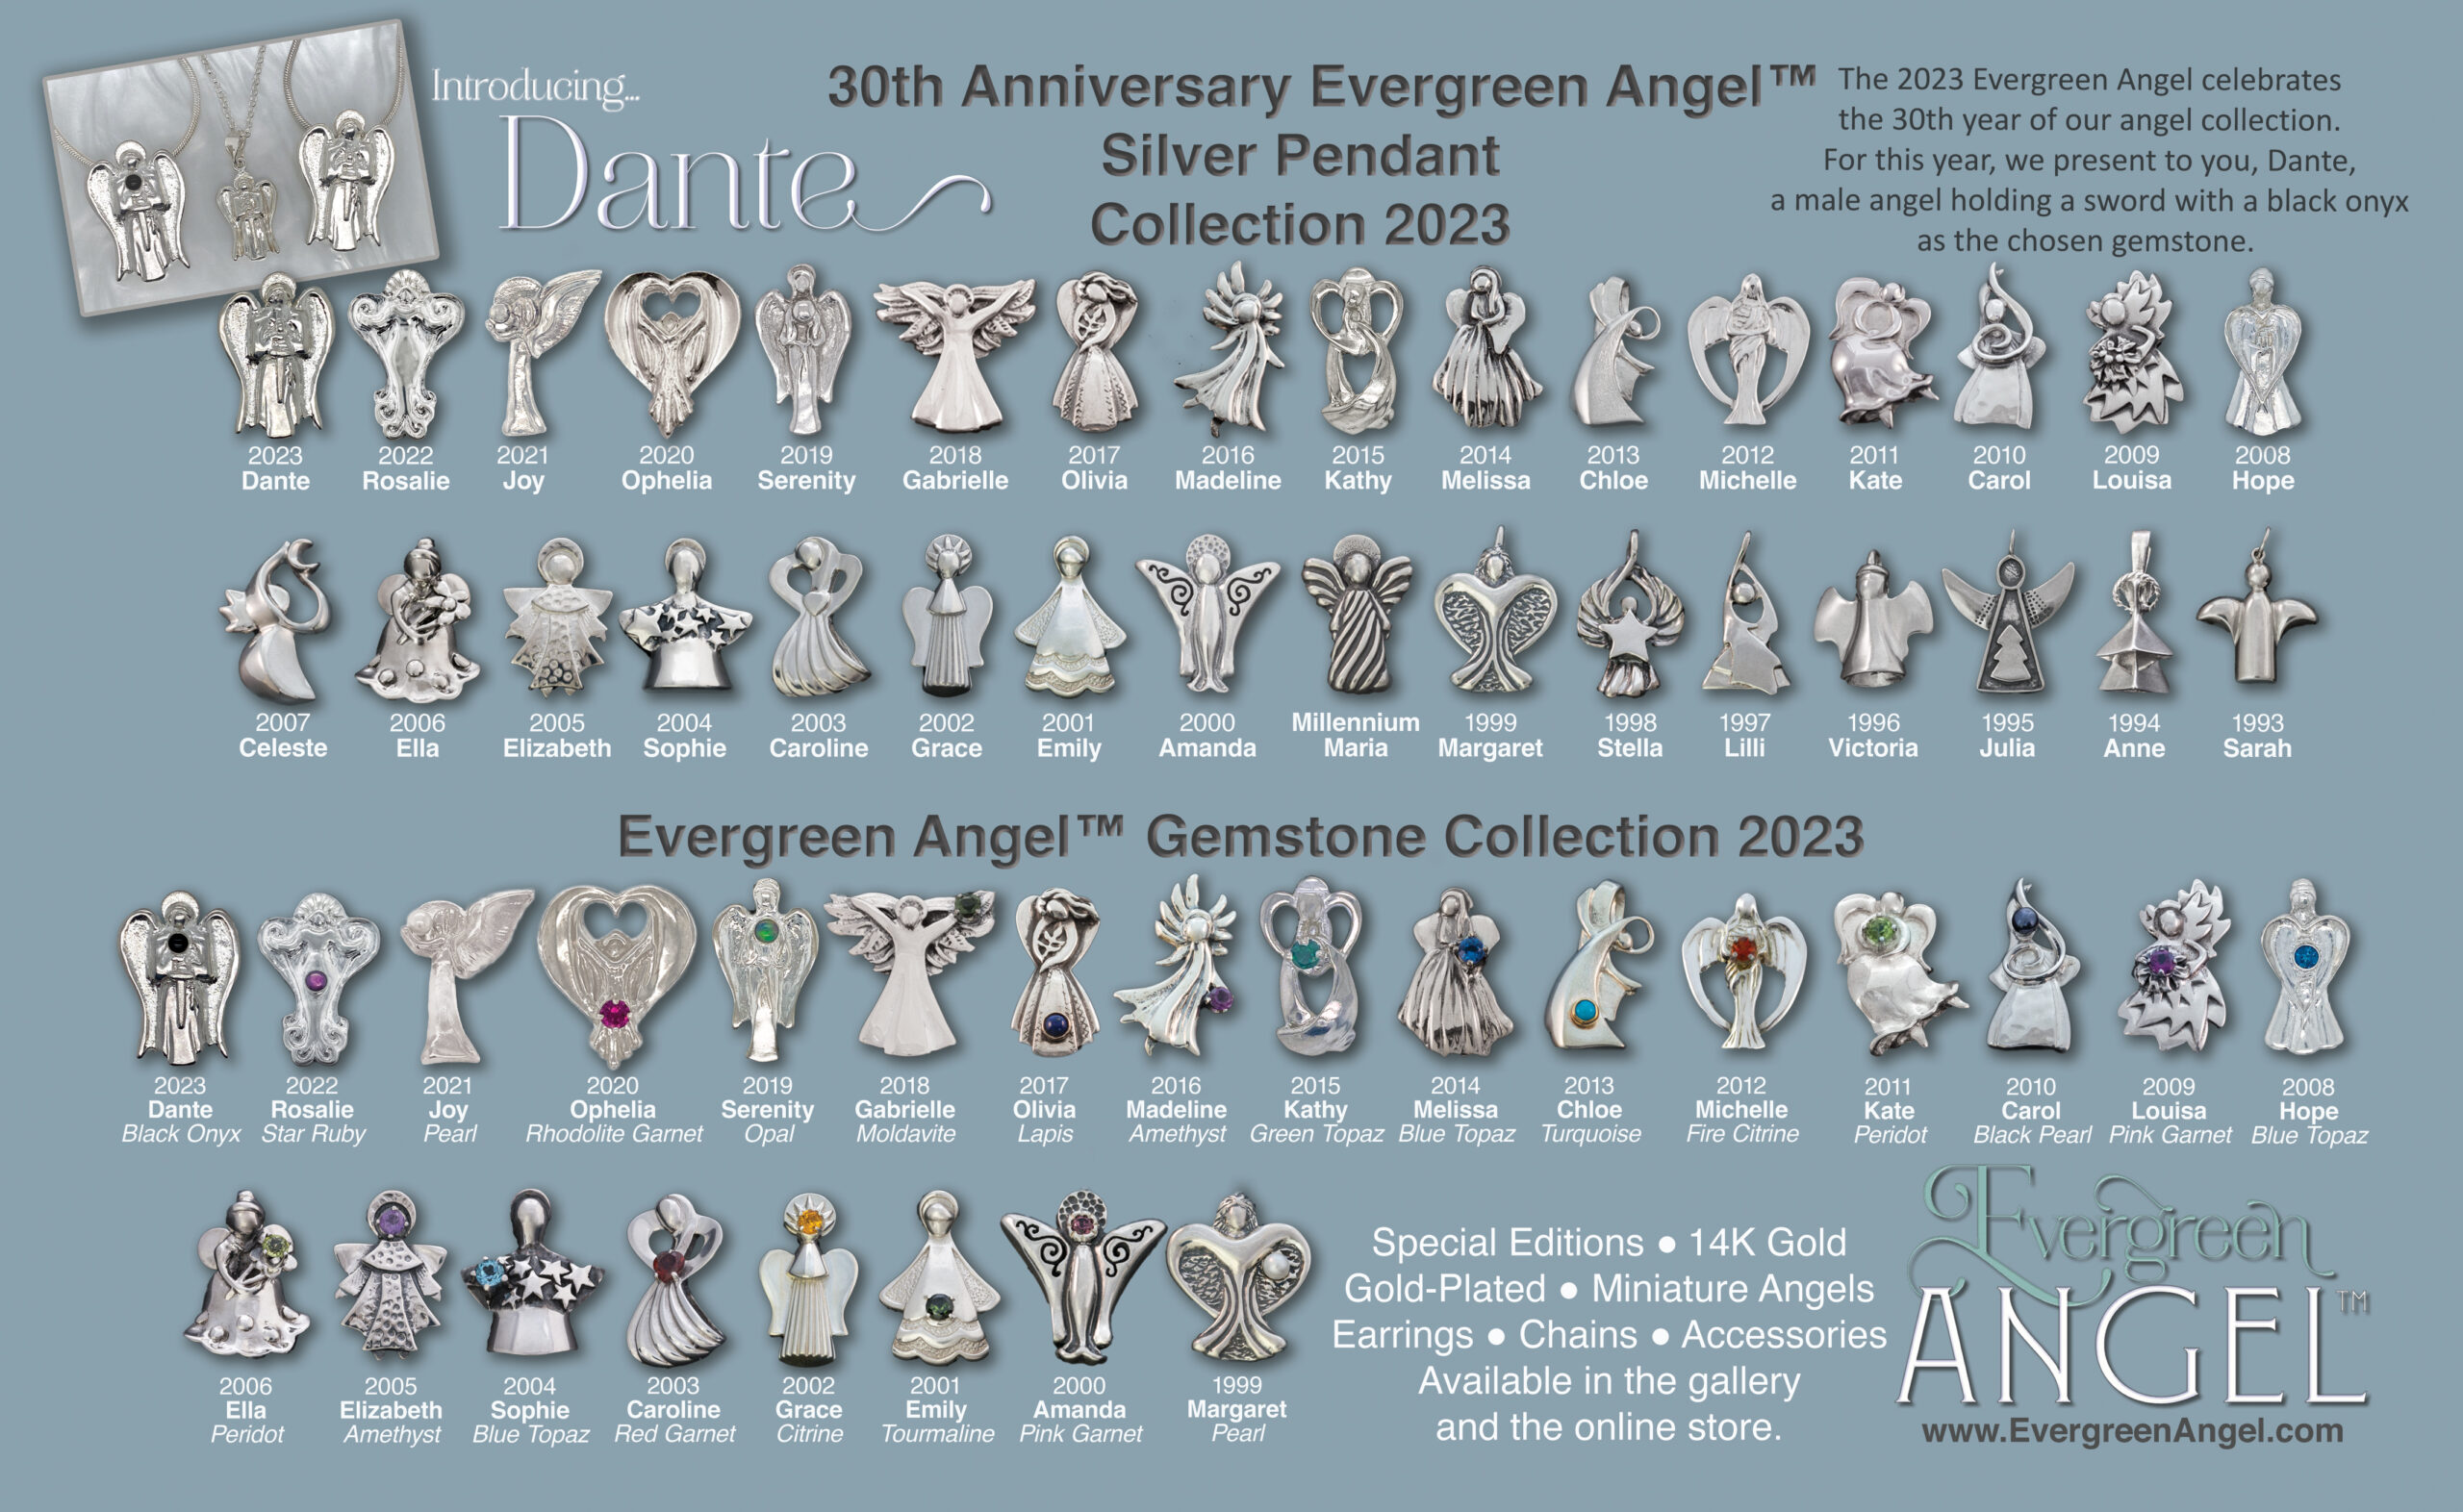 Brochure of the Evergreen Angel Jewelry Collection listing all of the angels, dates and names.